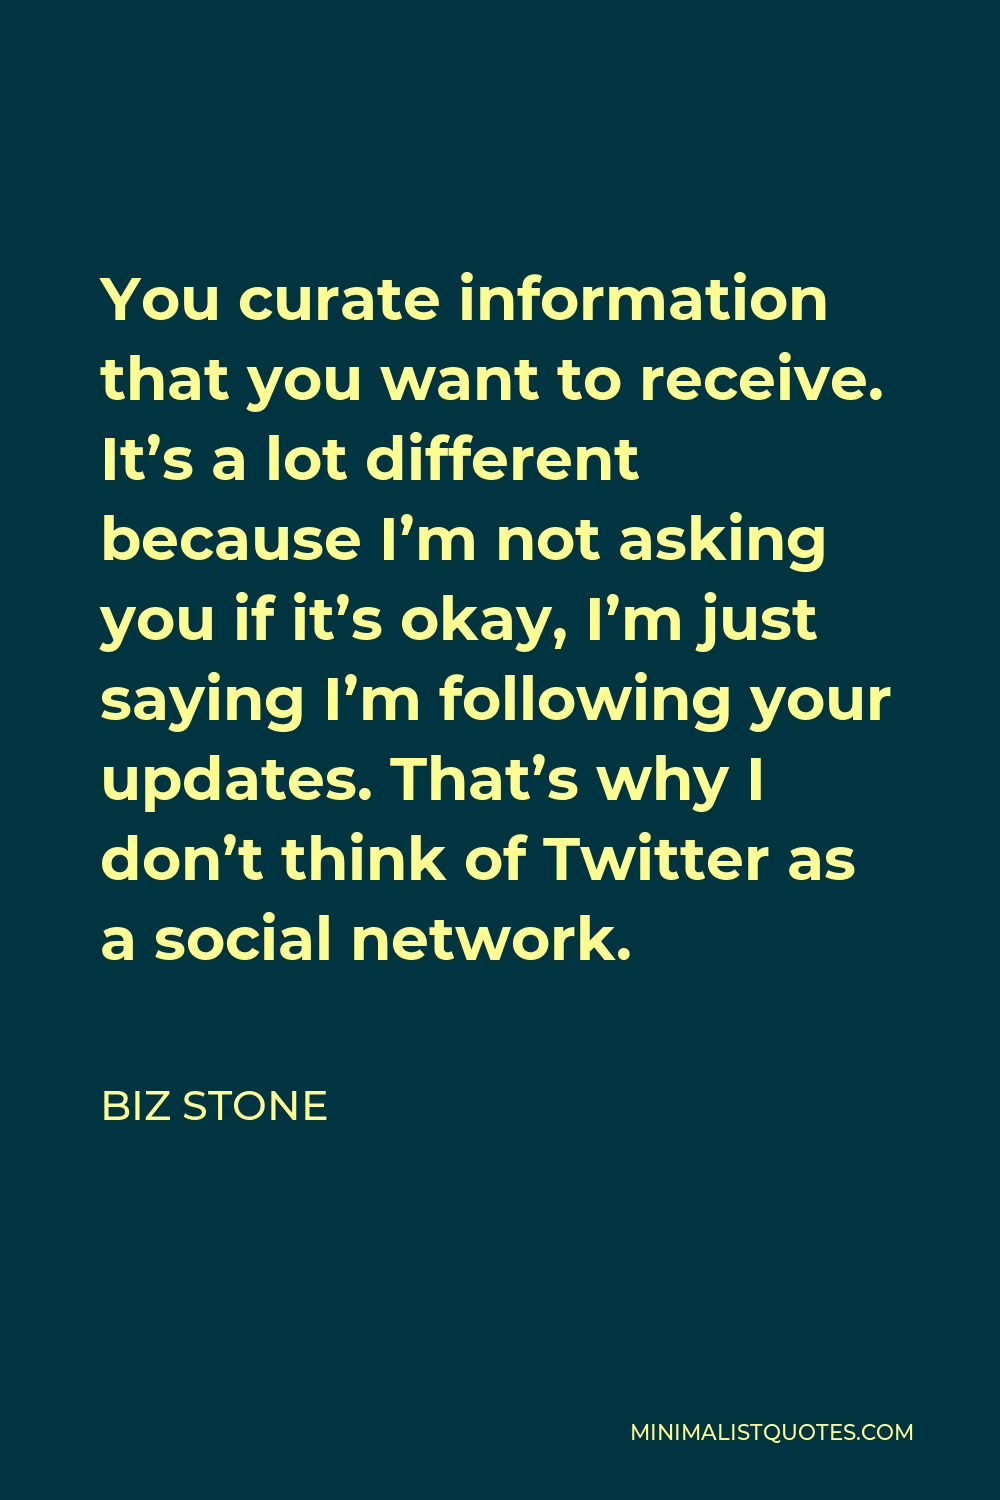 Biz Stone Quote - You curate information that you want to receive. It’s a lot different because I’m not asking you if it’s okay, I’m just saying I’m following your updates. That’s why I don’t think of Twitter as a social network.